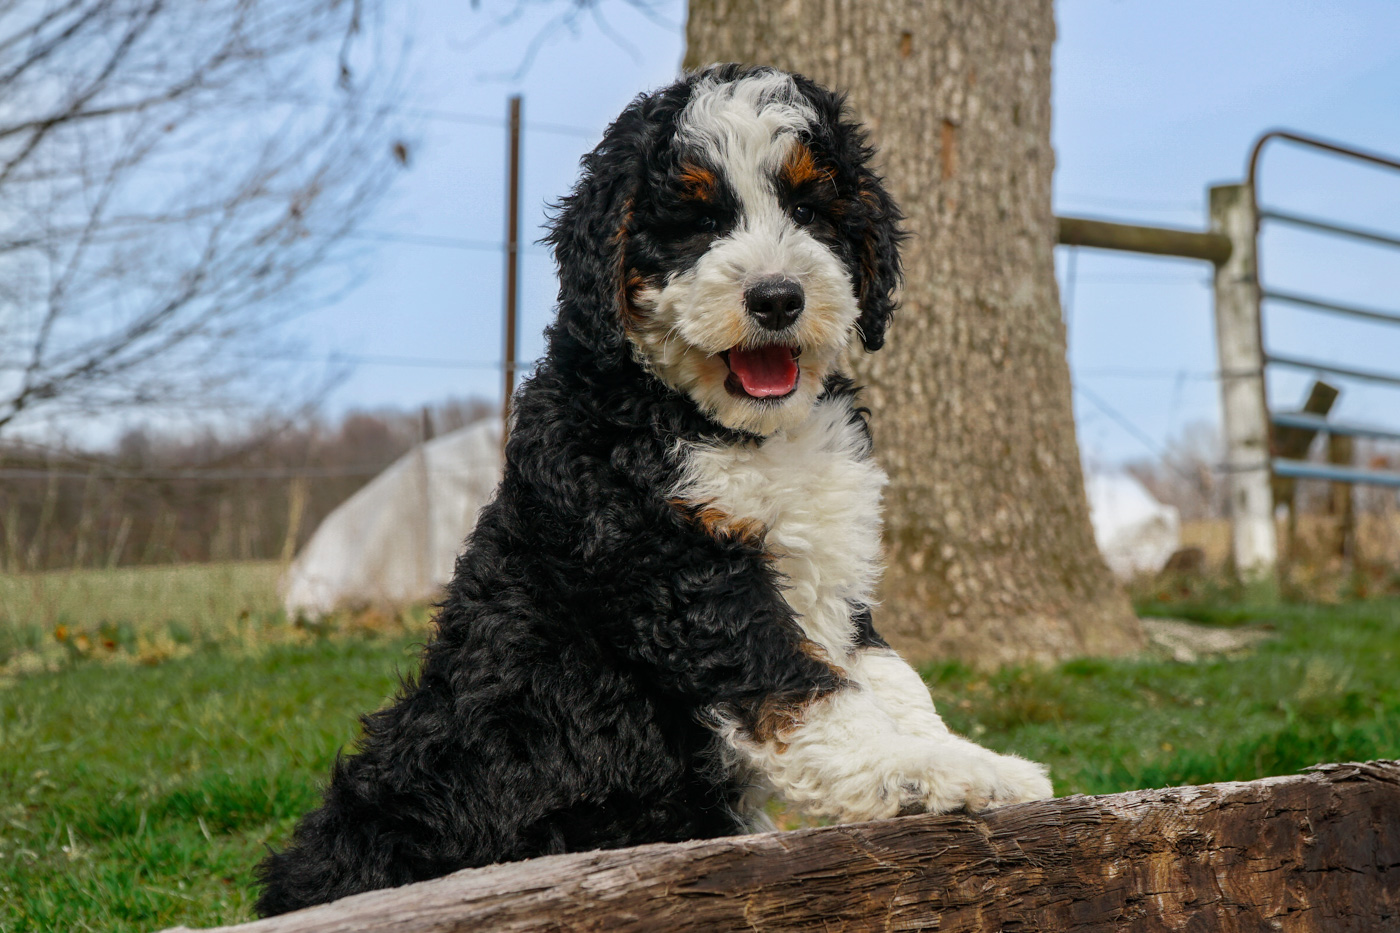 Screenshot of Hoosier Canines' user-friendly website and puppy reservation form, inviting potential Bernedoodle owners to become part of the family